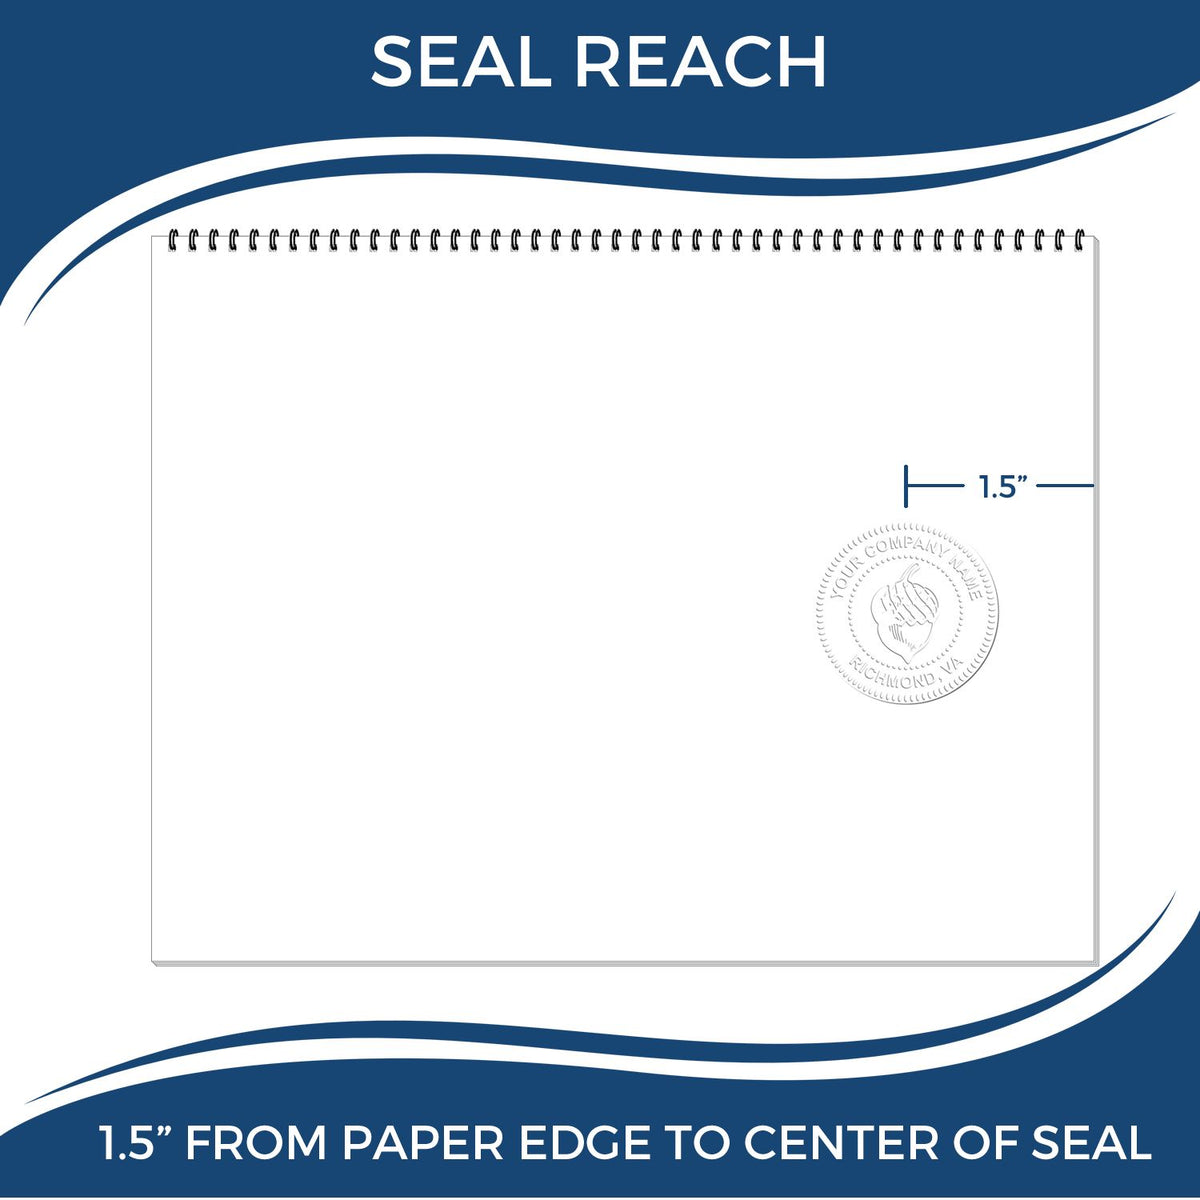 An infographic showing the seal reach which is represented by a ruler and a miniature seal image of the Gift West Virginia Land Surveyor Seal